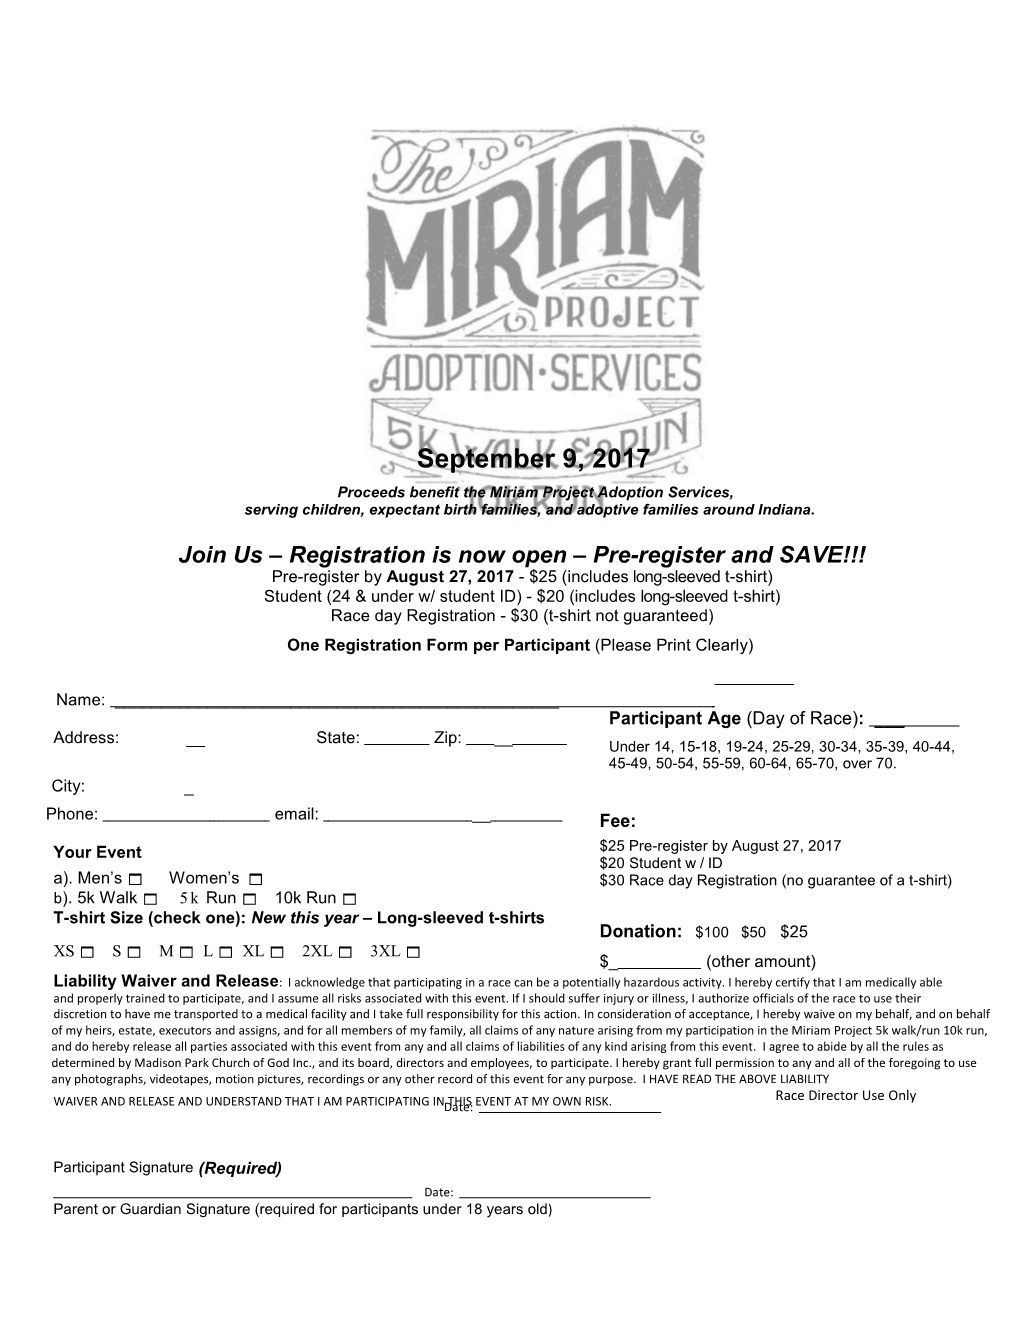 Proceeds Benefit the Miriam Project Adoption Services